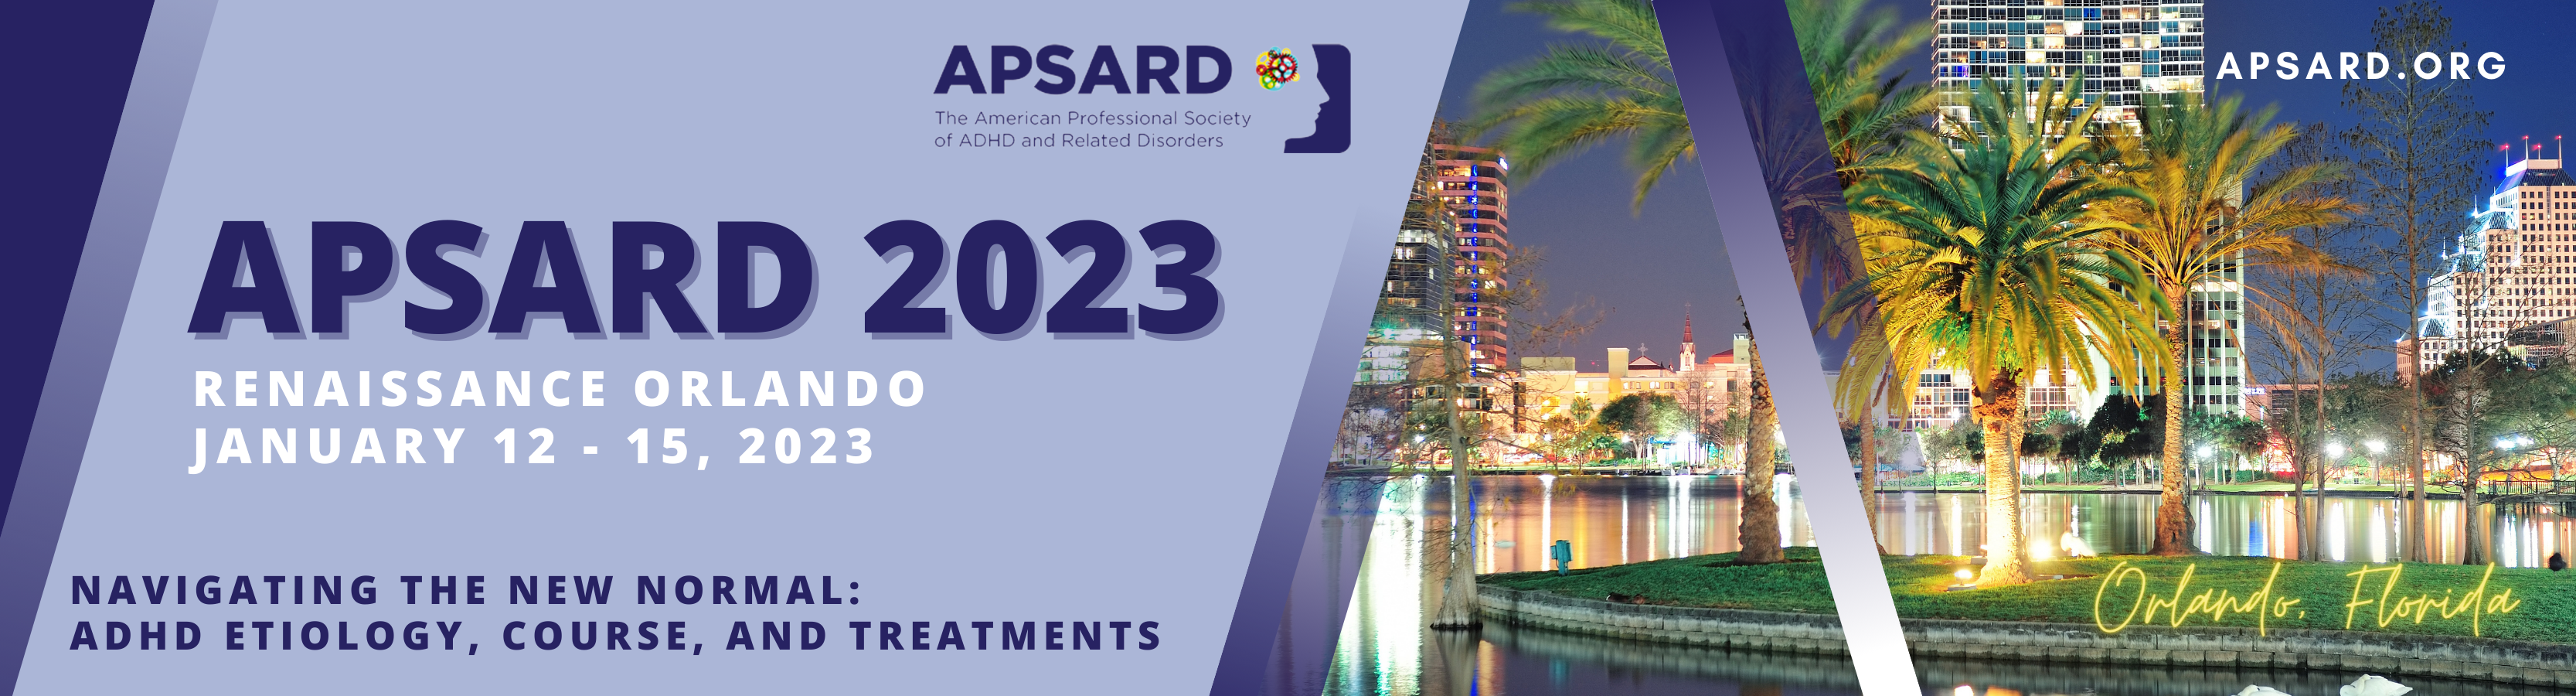 2023 APSARD Annual Conference, January 12-15